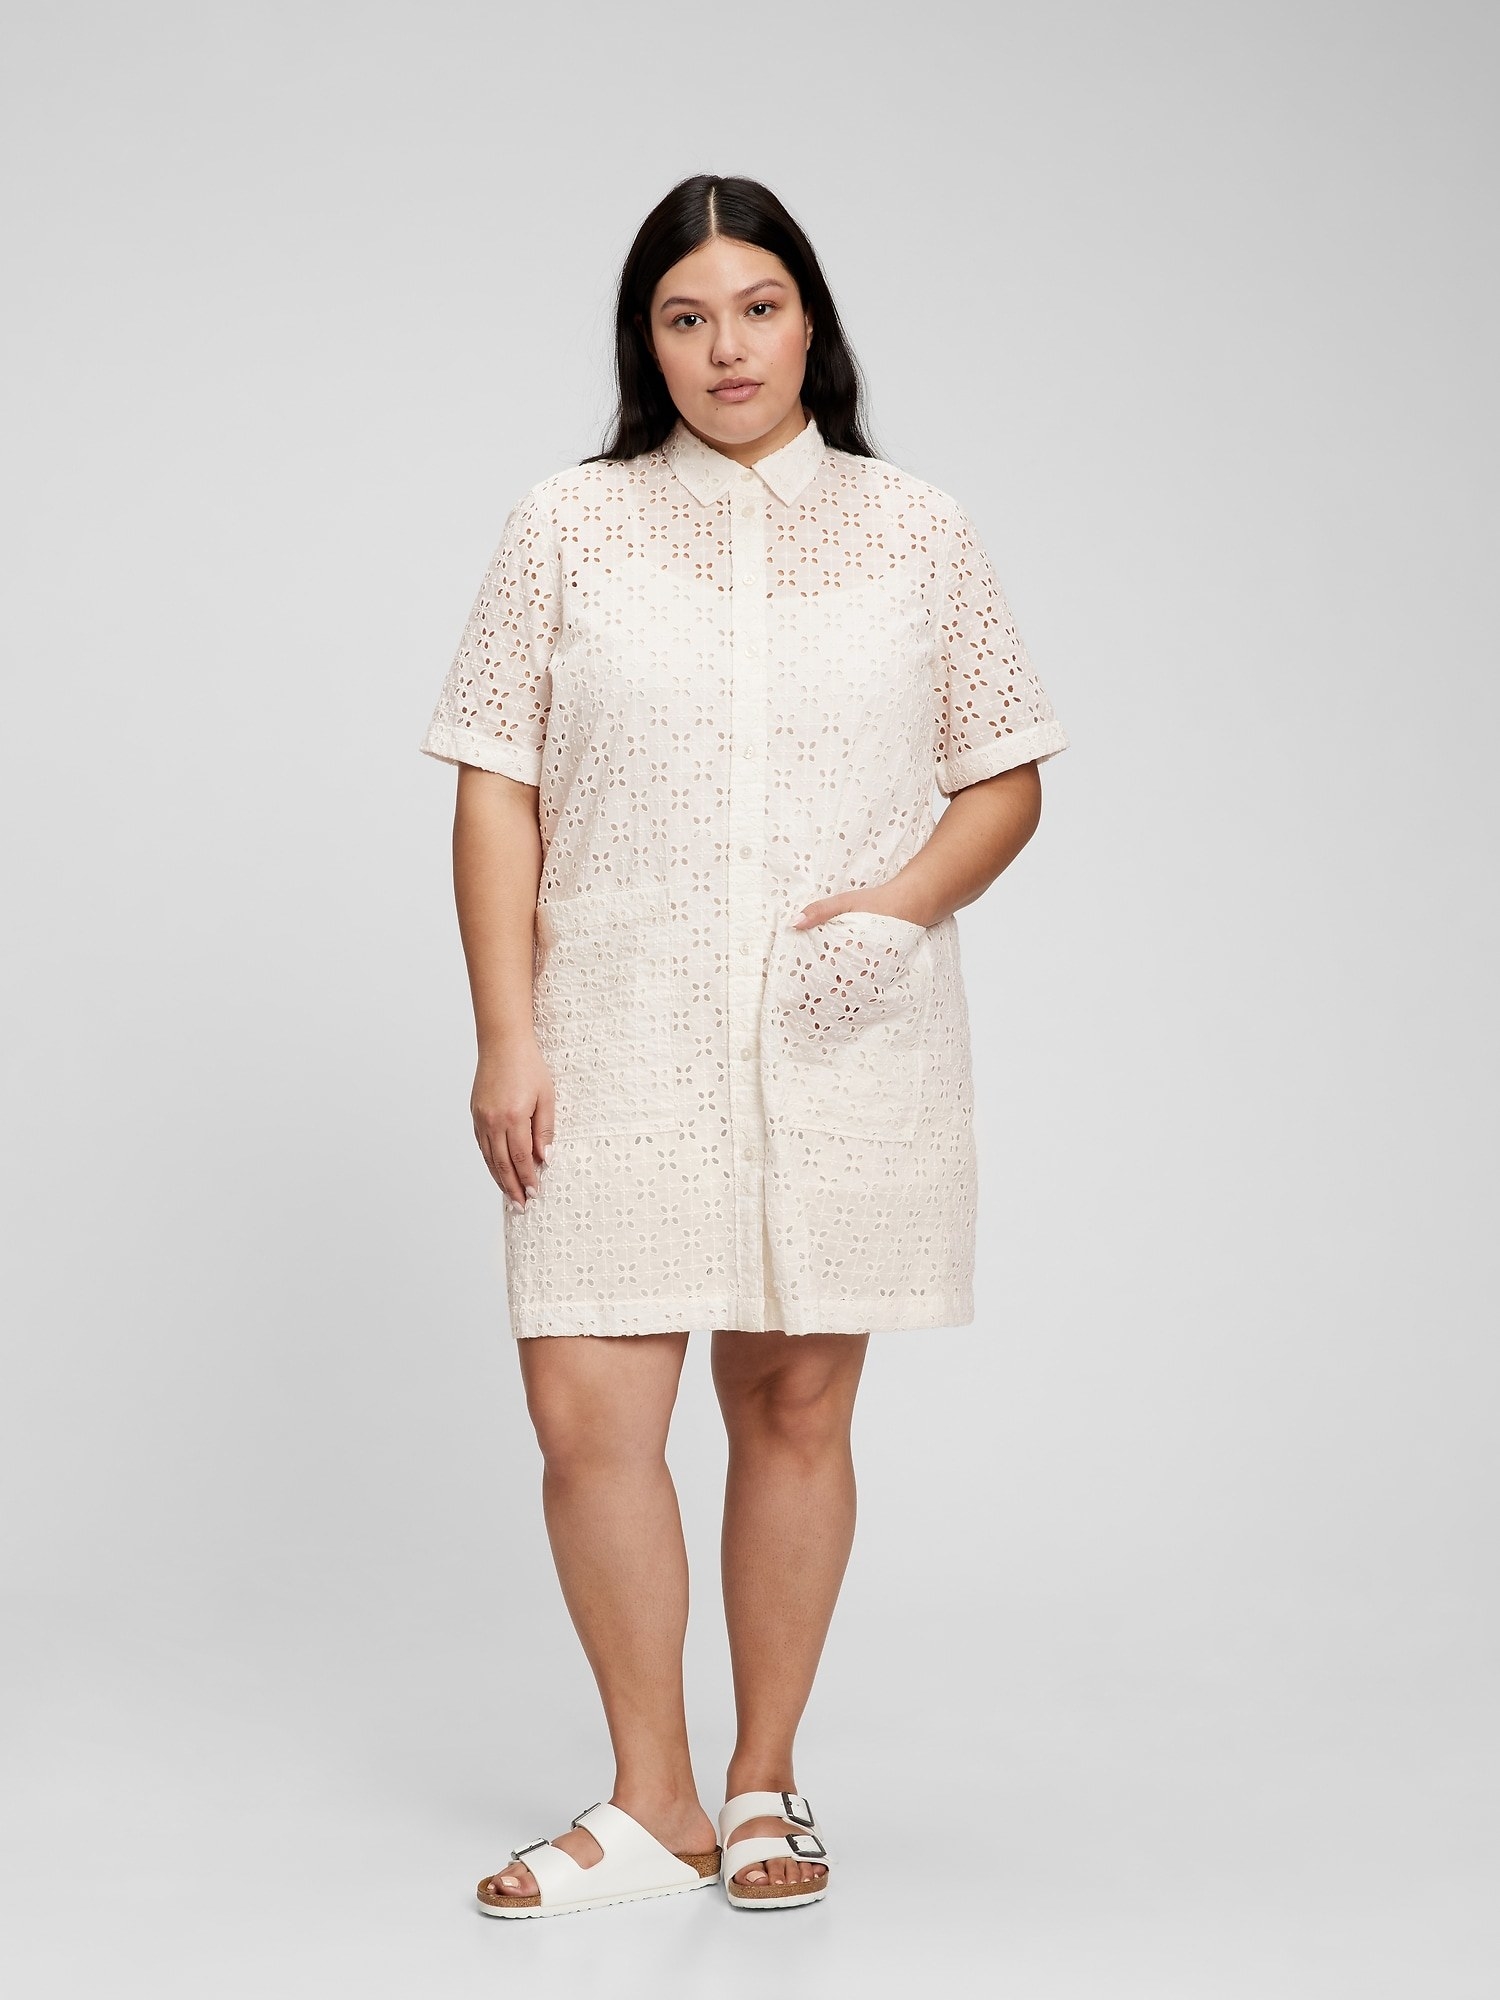 model in a white eyelet button-up mid thigh length dress with two large pockets over a white slip